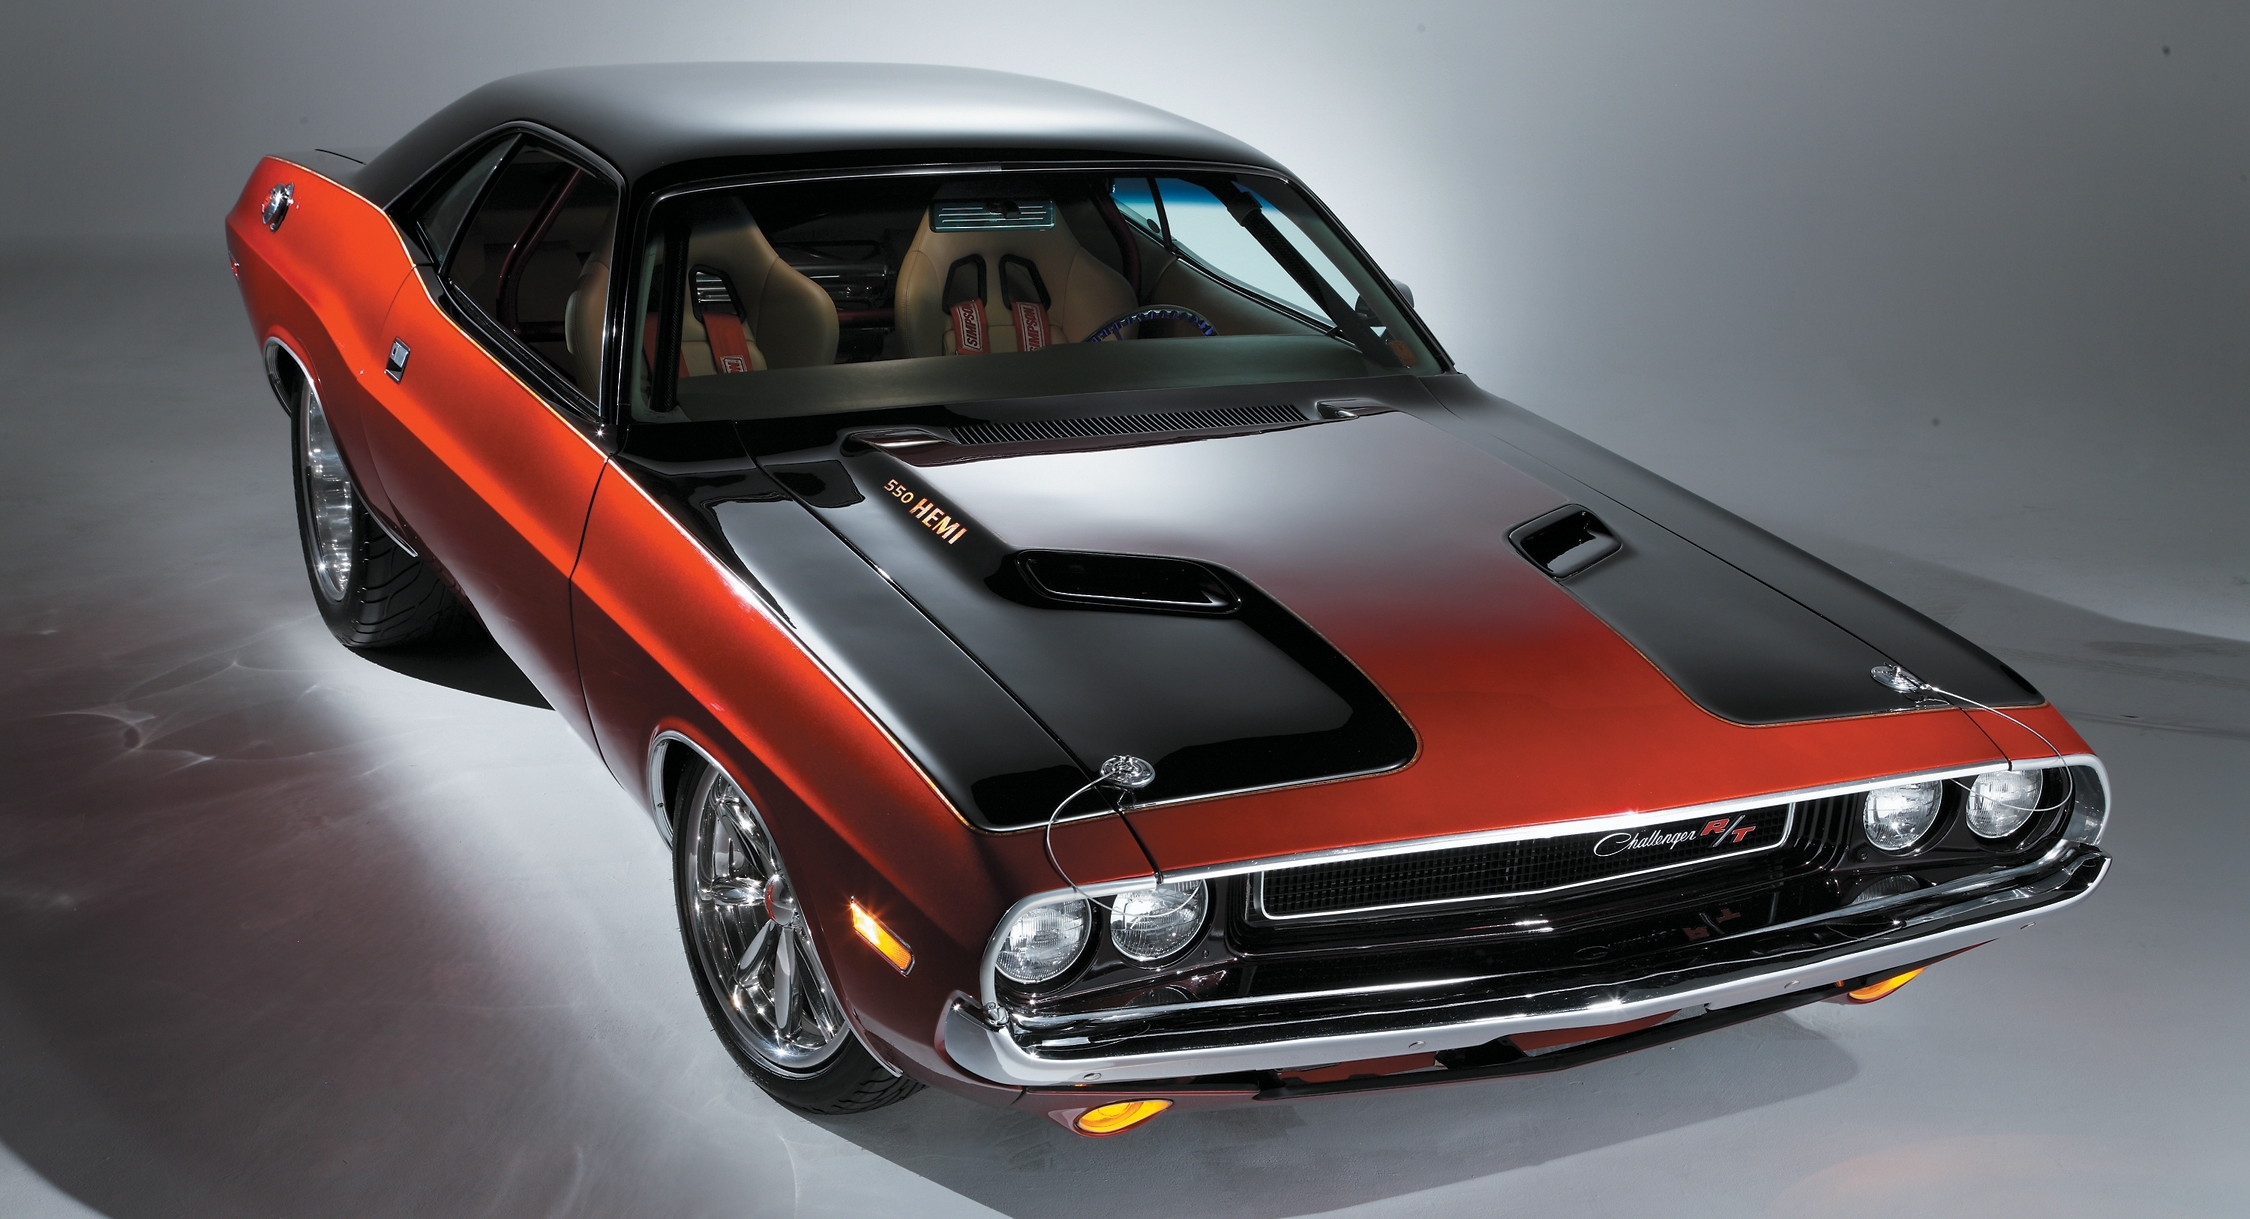 Muscle  Wallpaper on Cars Muscle Dodge Challenger R T Hd Wallpaper   Cars   Trucks   607039